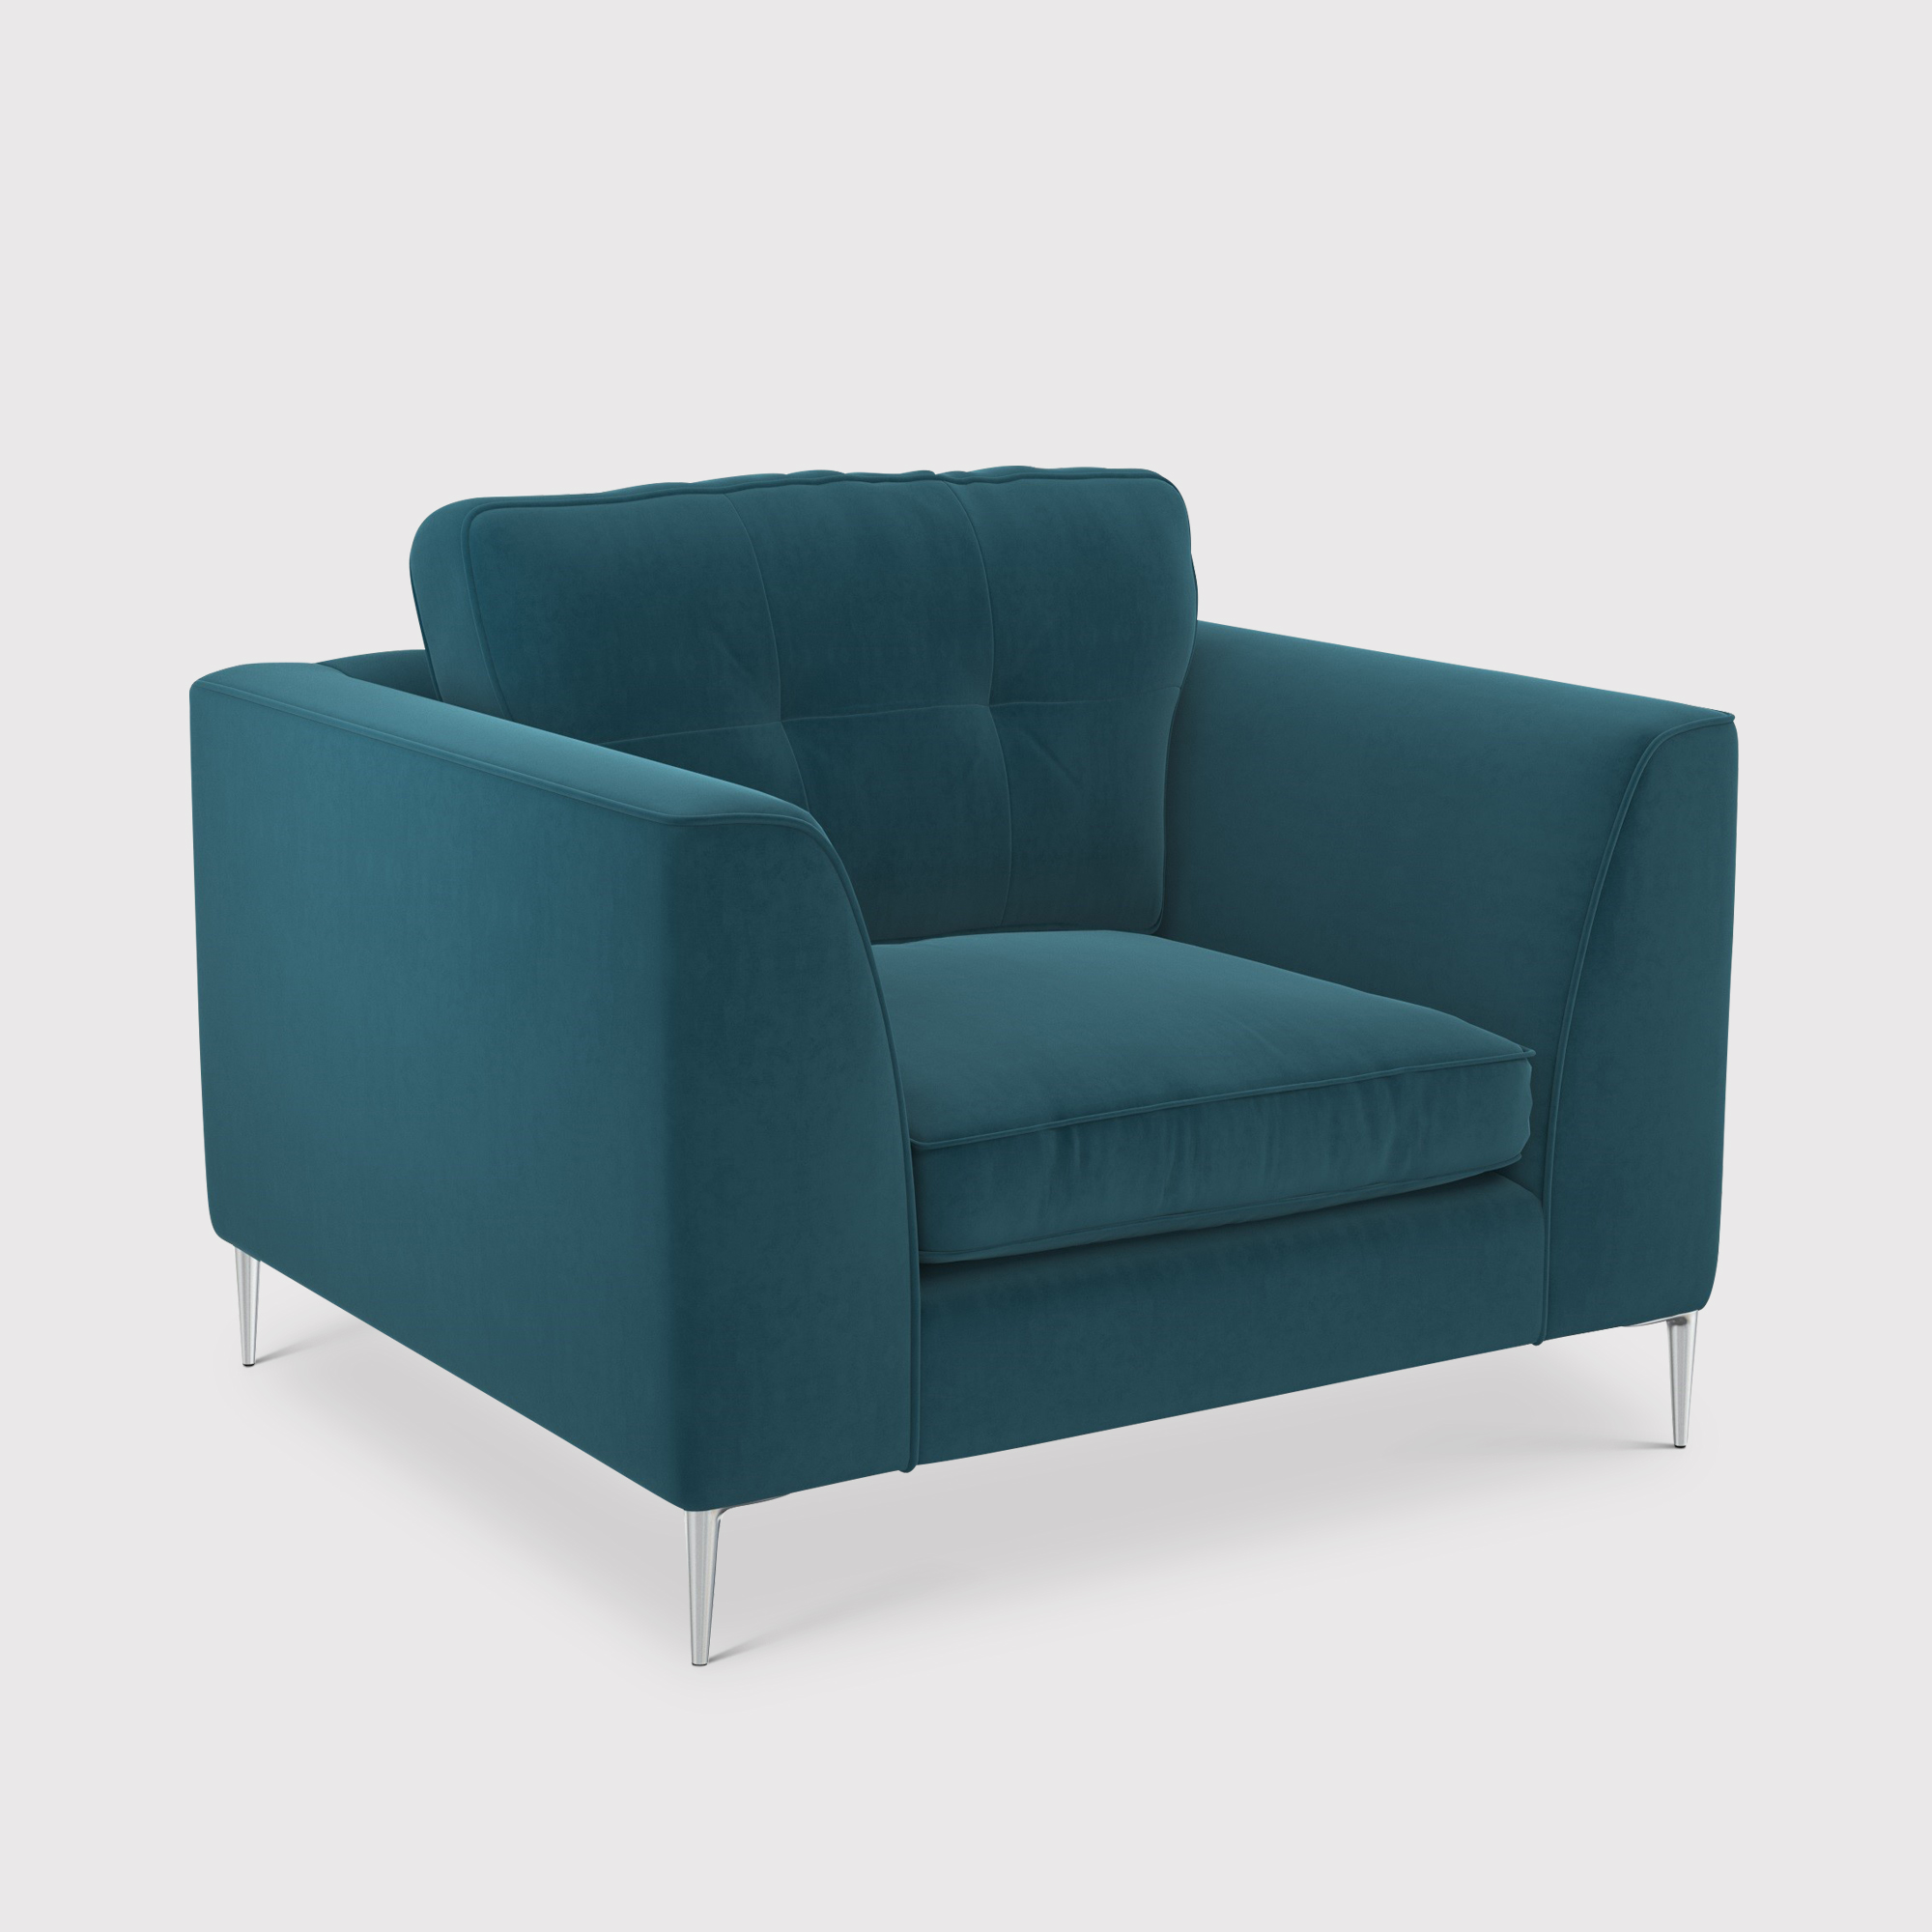 Conza Armchair, Teal Fabric | Barker & Stonehouse